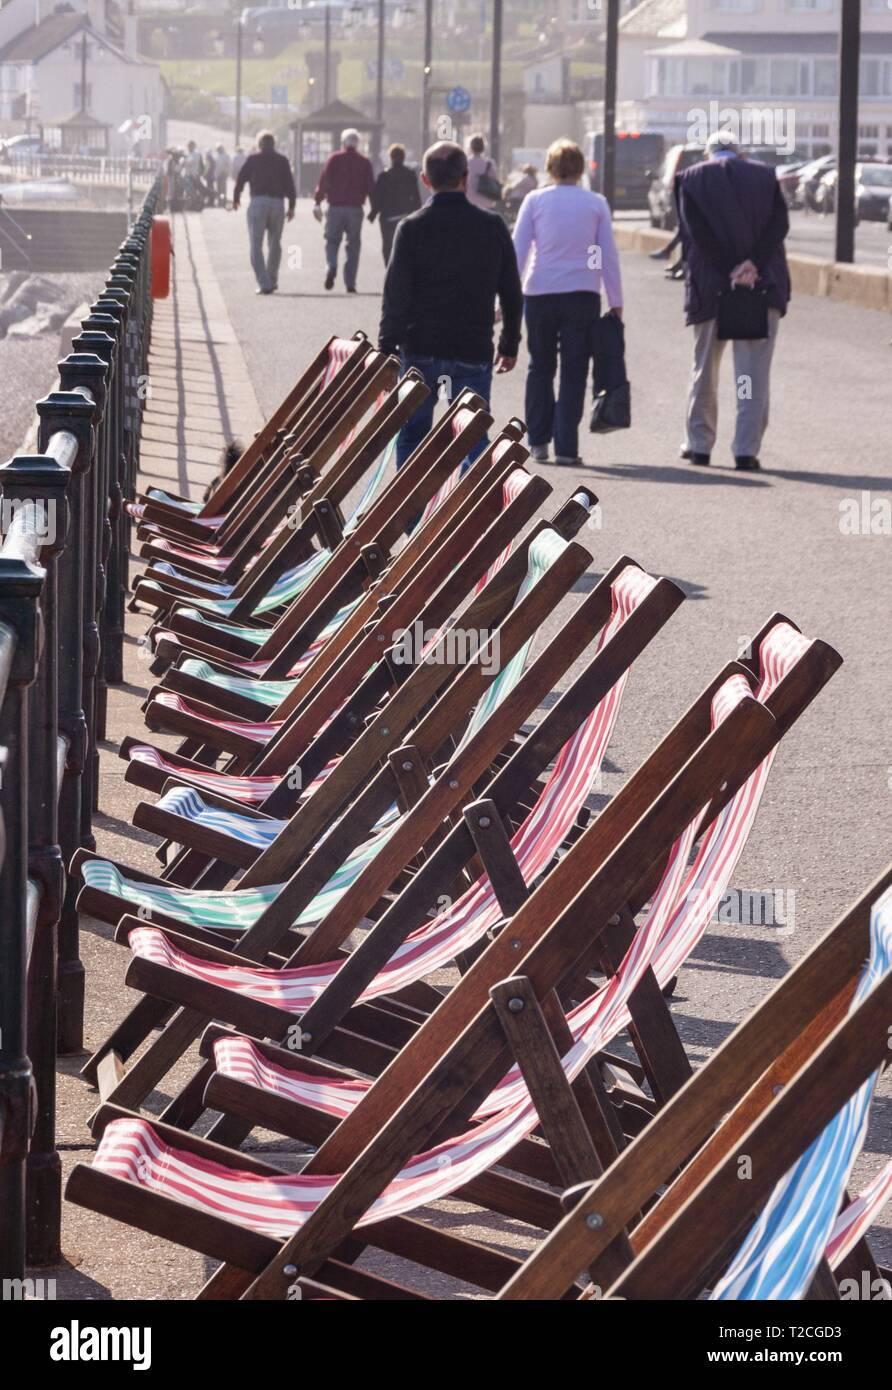 Sidmouth, 1st Apr 19 With the arrival of April, deckchairs are once more out along the seafront at Sidmouth in Devon on a glorious springtime day. Credit: Photo Central/Alamy Live News Stock Photo